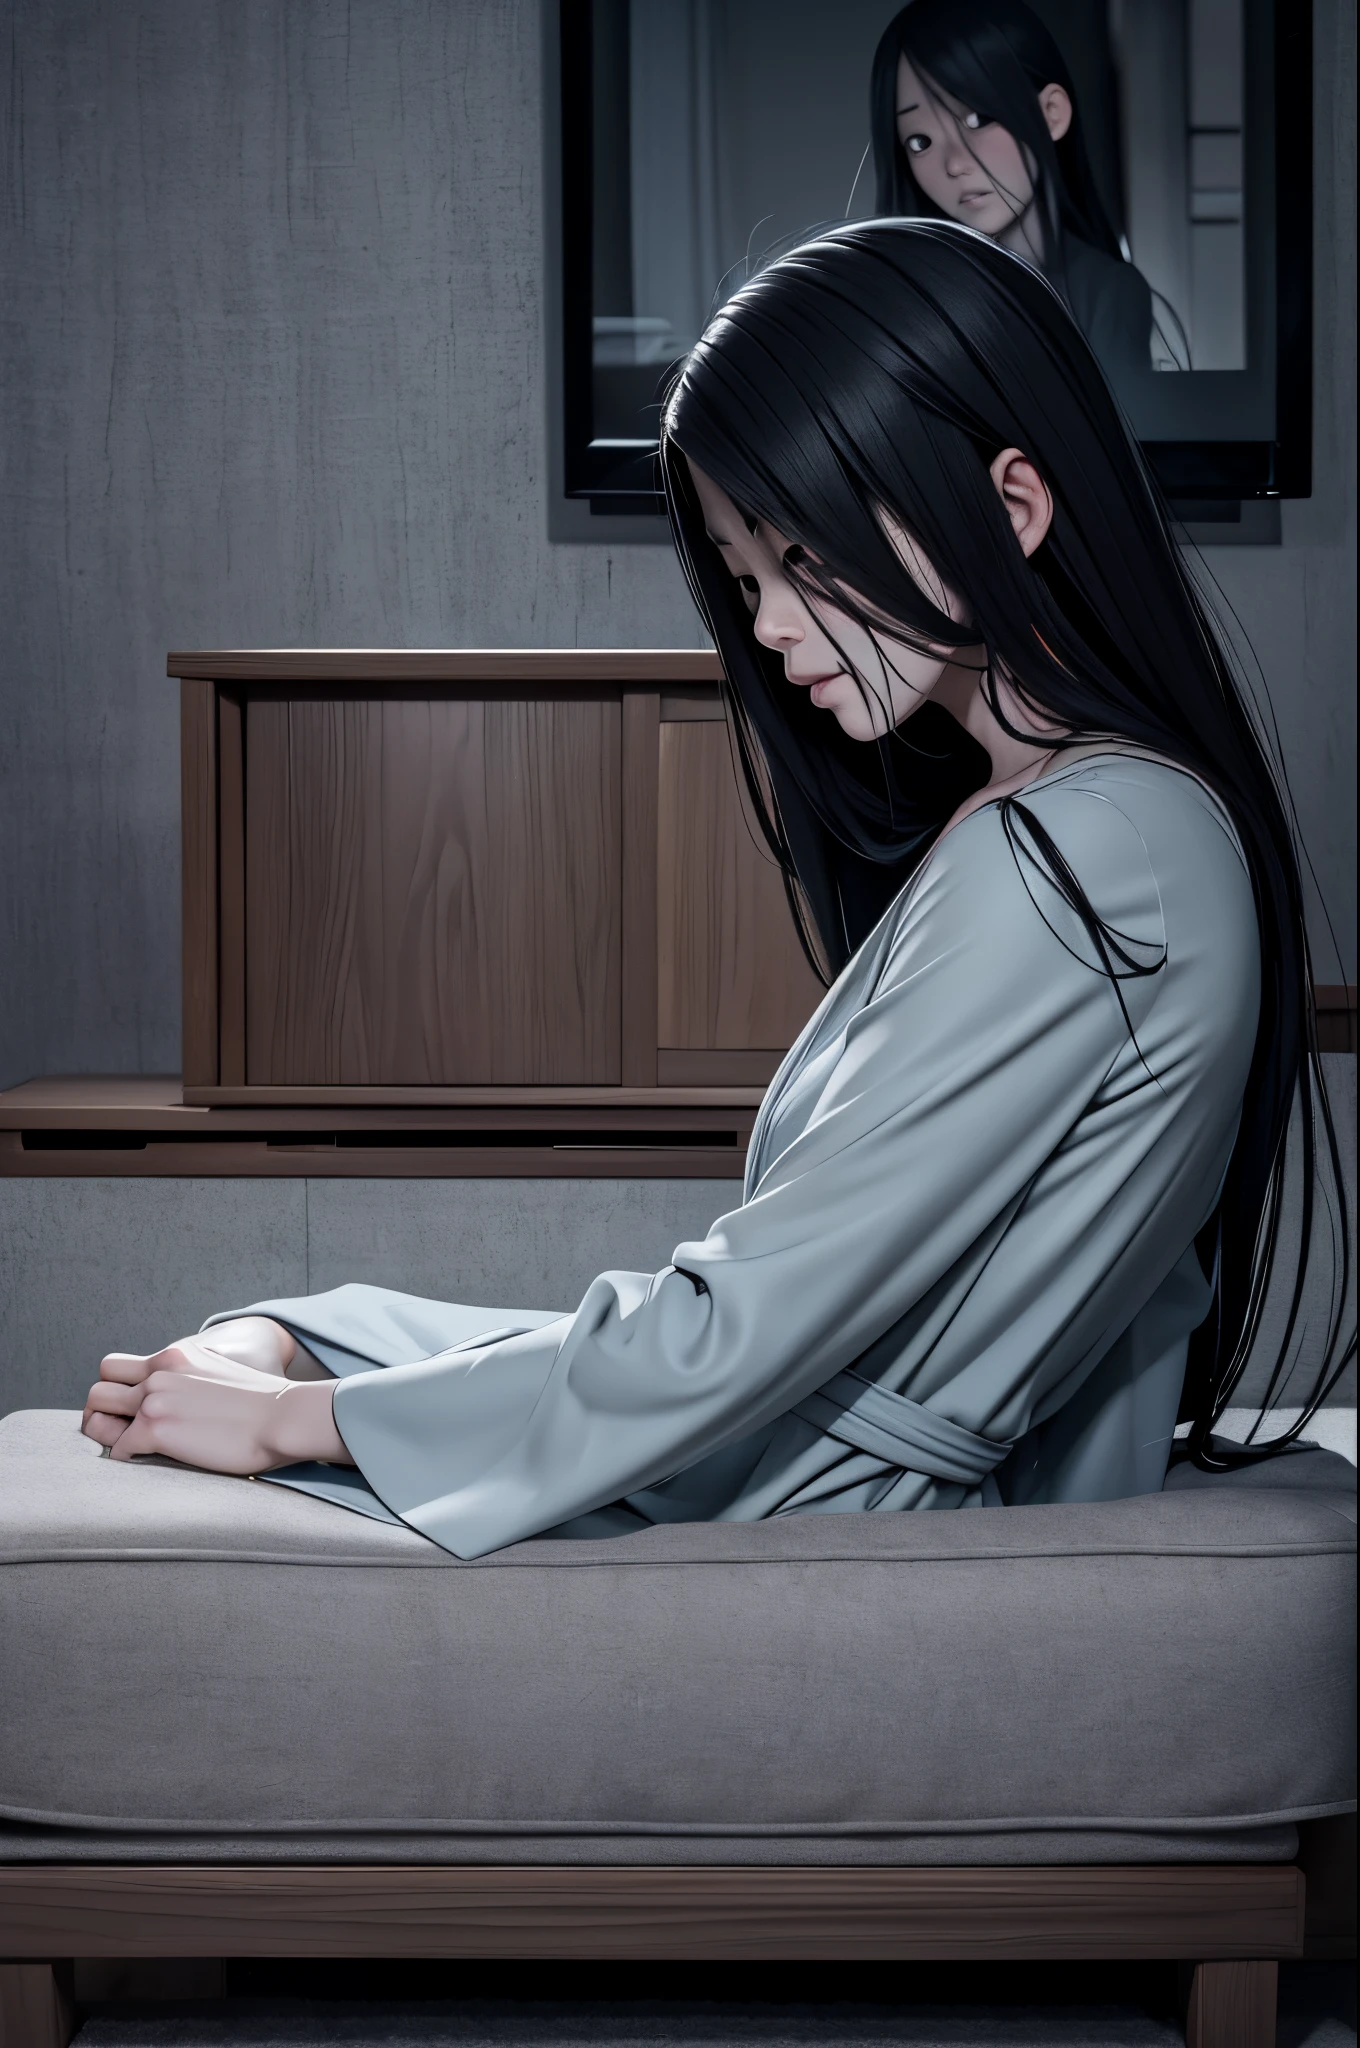 Sadako, soaking, wet robe, gray colored skin, Hair covers the face, sexy for.Sadako crawled out of the TV，A woman lying on the floor in front of the TV, japanese horror, style of hajime isayama, japanese horror movie footage, Junji Ito 4K, japanese pop surrealism